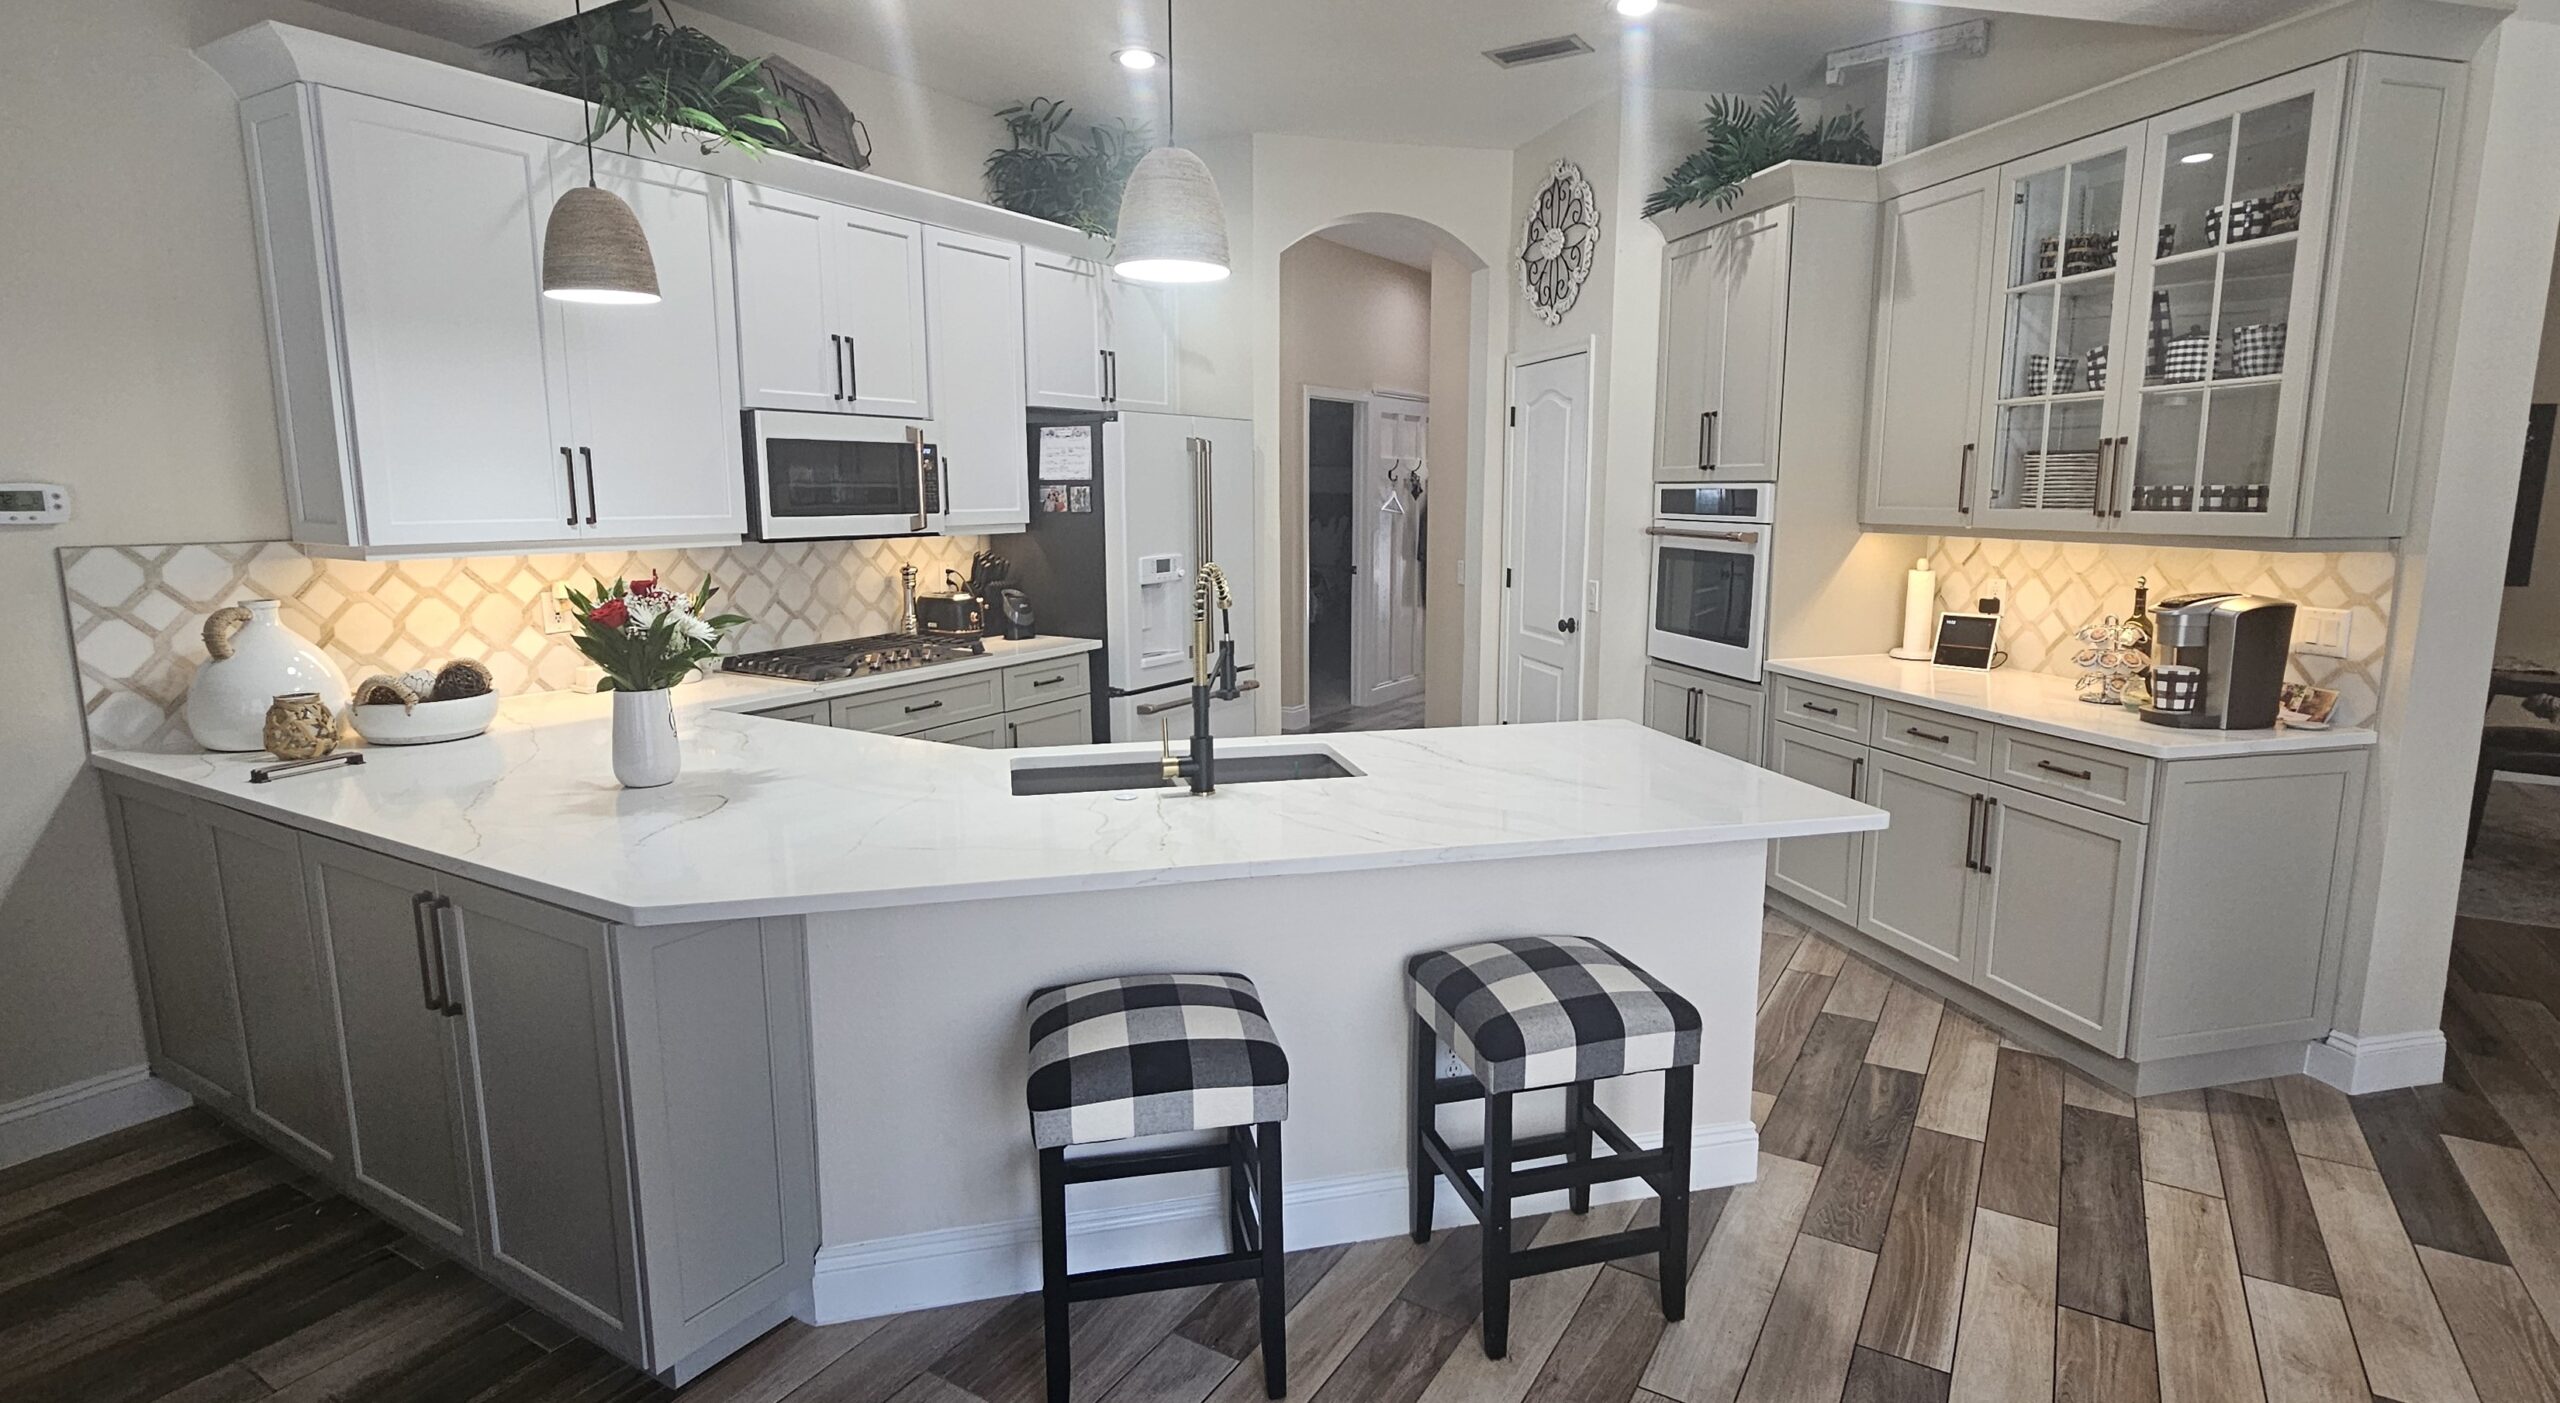 Modern appliances with a high-quality finish, granite worktops, and sleek white cabinet doors in Gulfport 